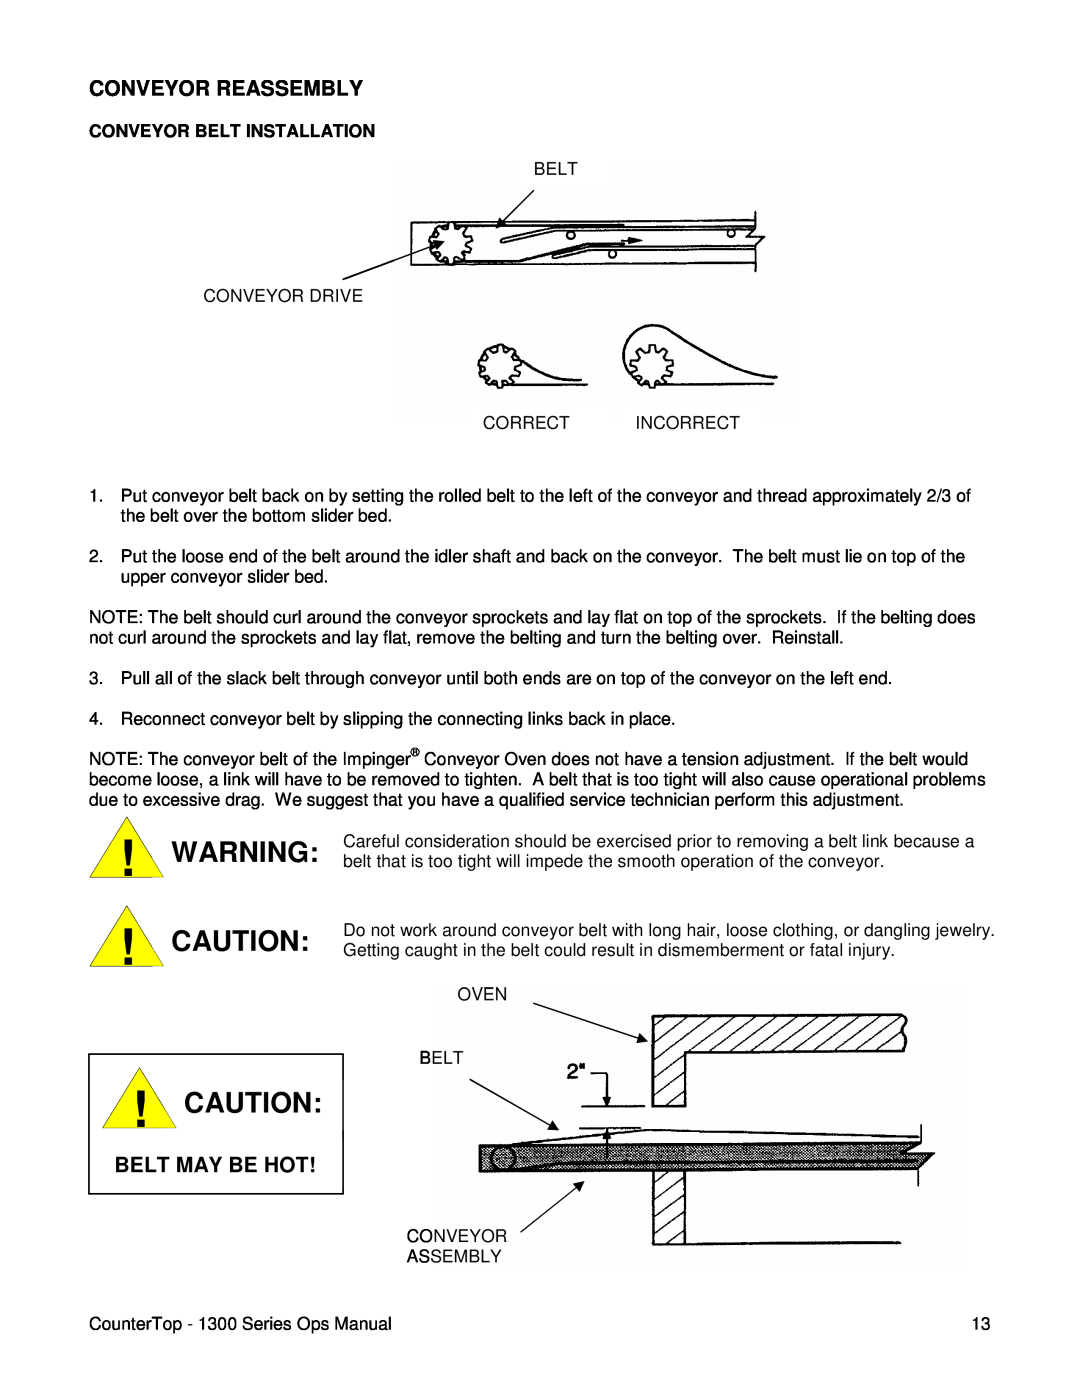 Lincoln 1300 Series operating instructions Conveyor Reassembly, Belt May Be Hot, Conveyor Belt Installation 